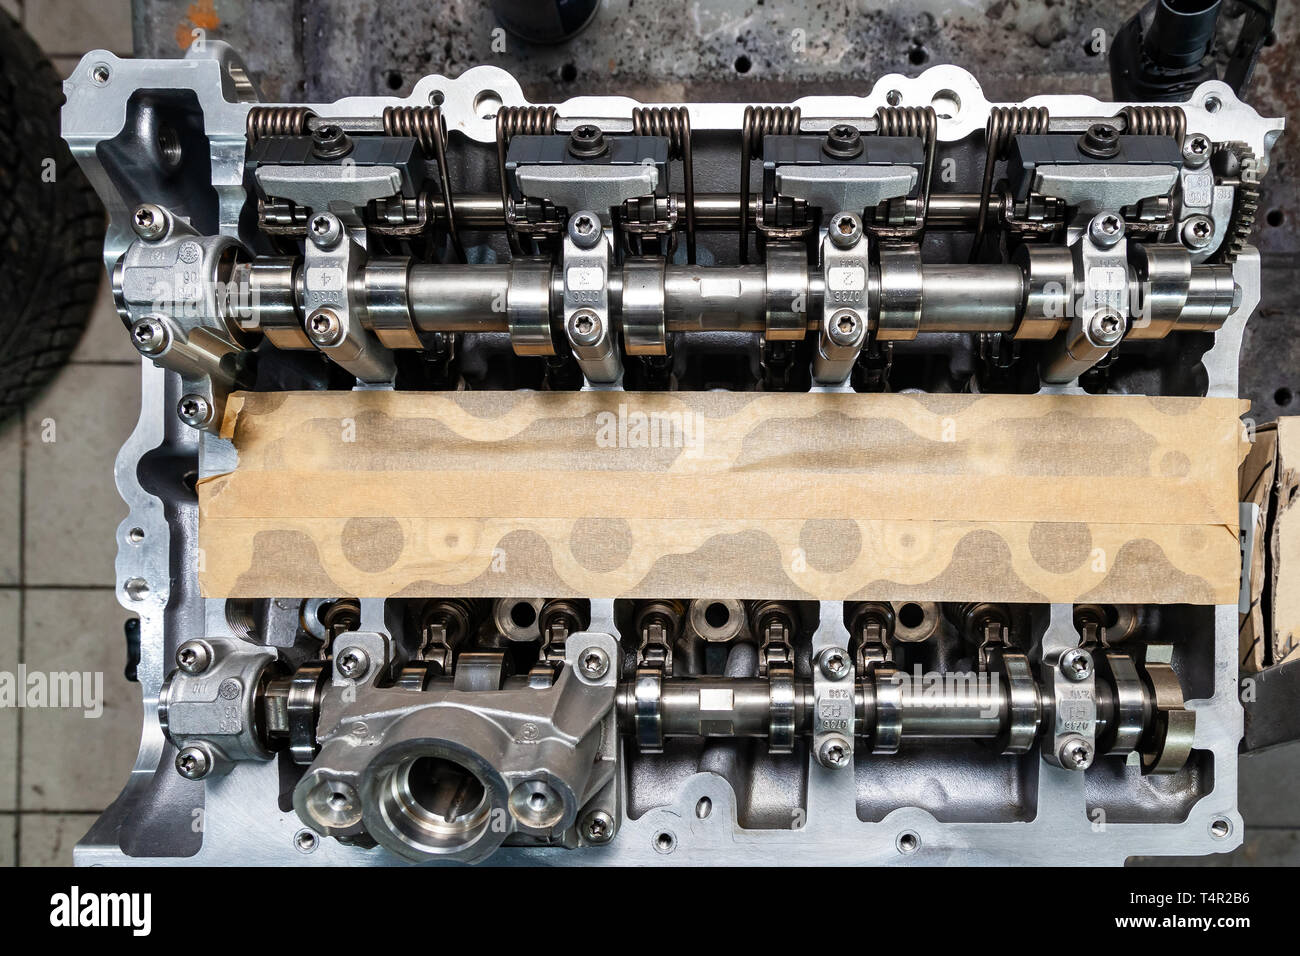 Top view of a four-cylinder engine with new camshaft dissembled and removed from car on a workbench in a vehicle repair workshop. Auto service industr Stock Photo